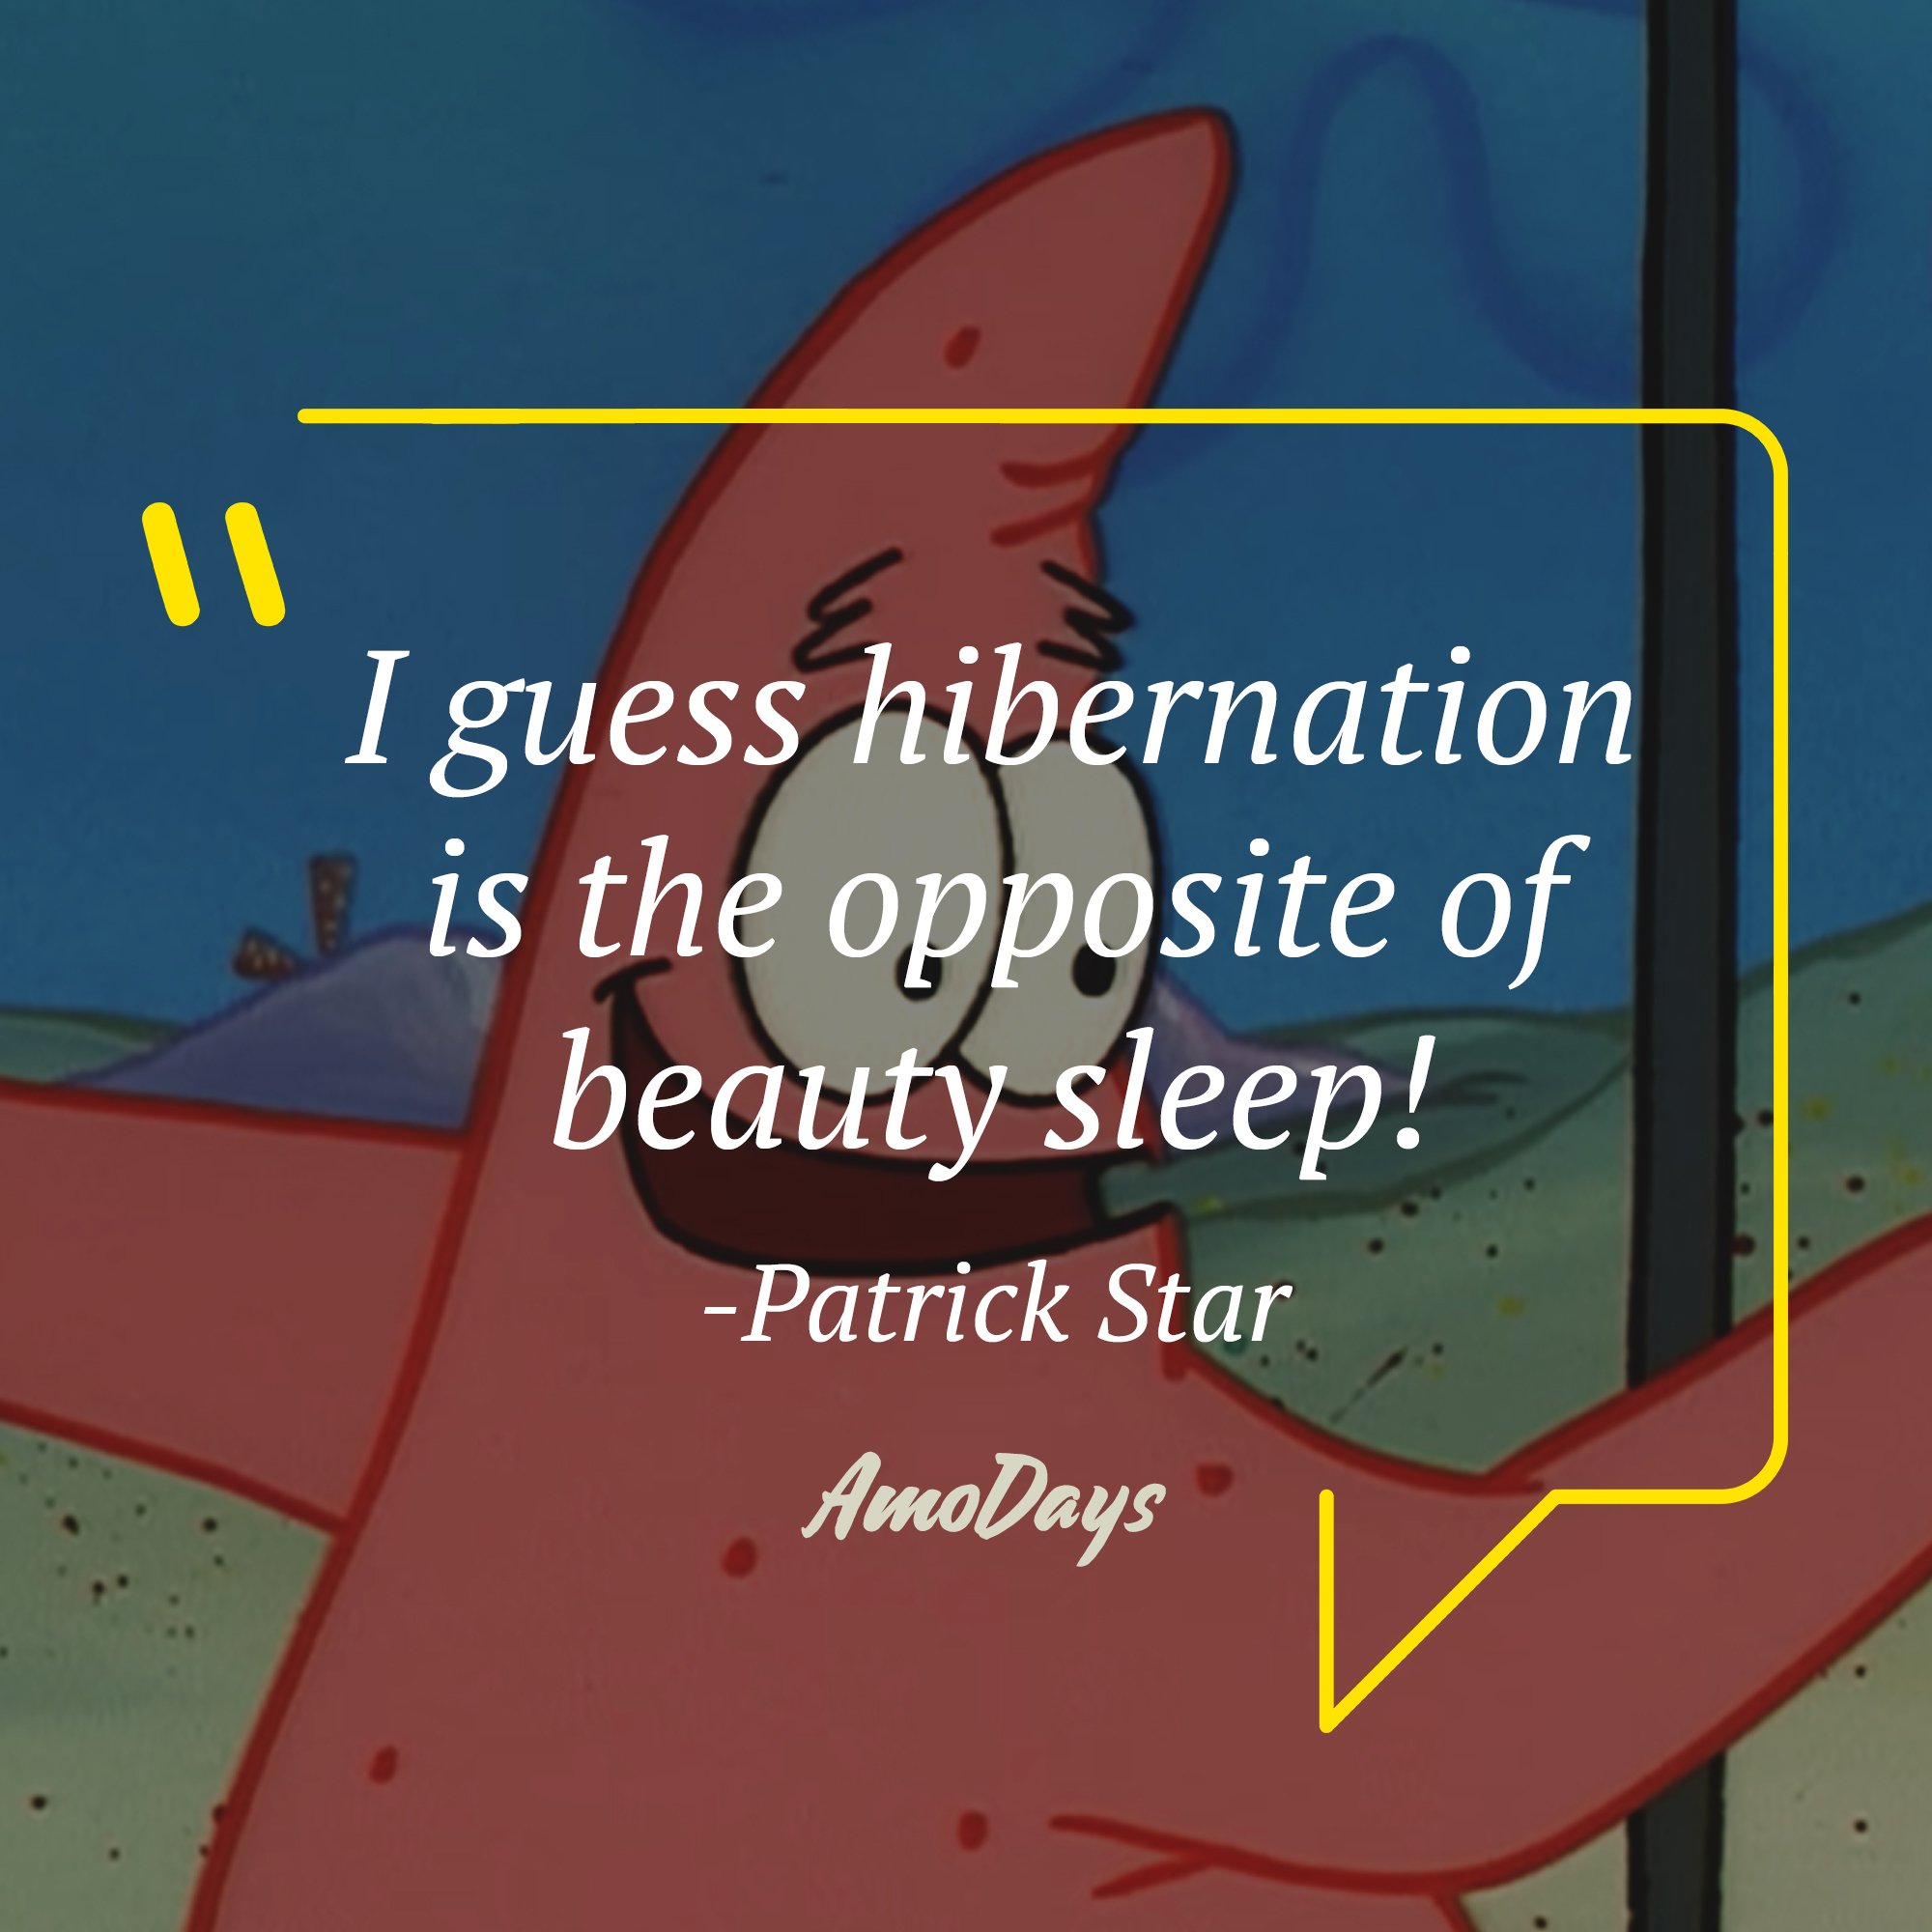 Patrick Star's Quote: "I guess hibernation is the opposite of beauty sleep!" | Source: AmoDays